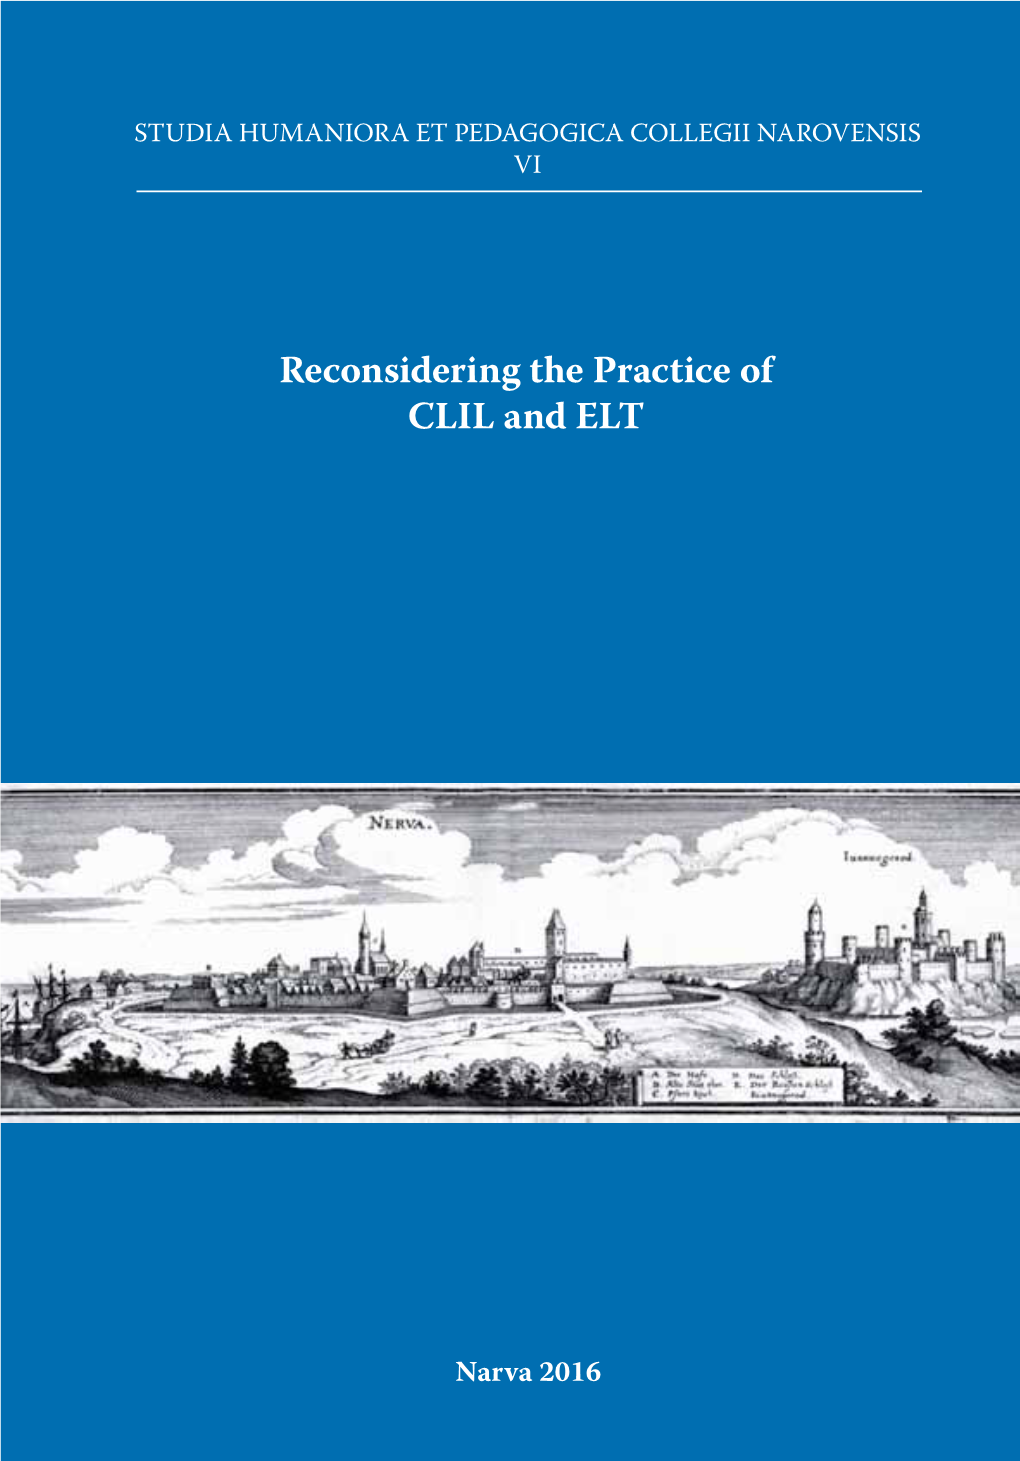 Reconsidering the Practice of CLIL and ELT